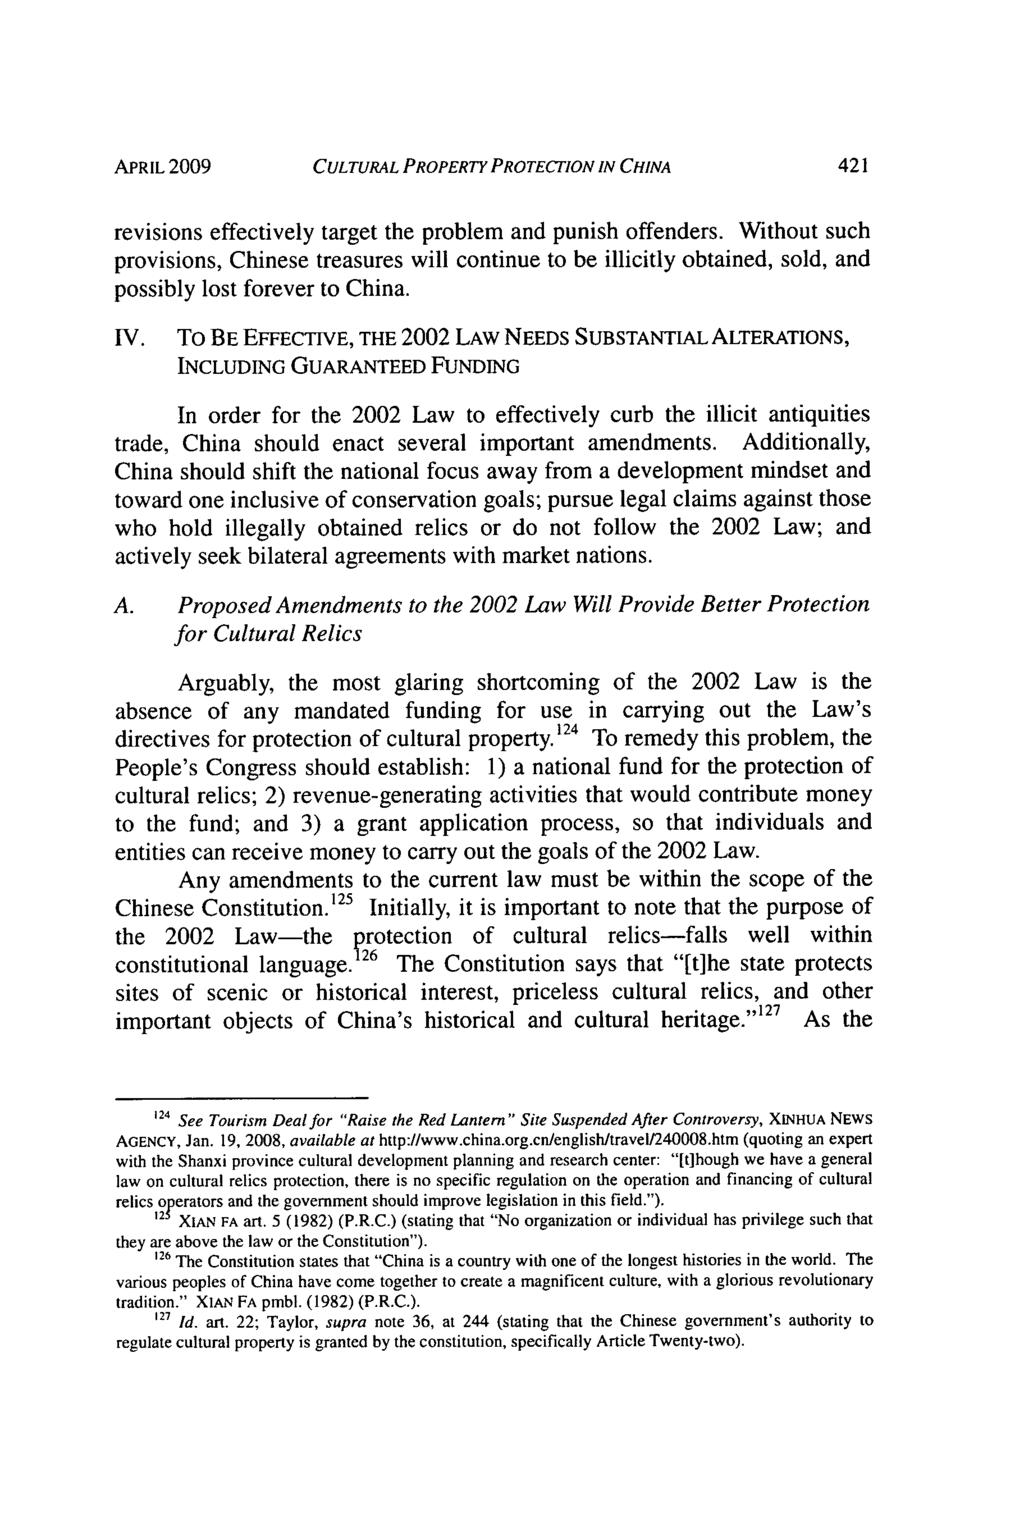 APRIL 2009 CULTURAL PROPERTY PROTECTION IN CHINA revisions effectively target the problem and punish offenders.